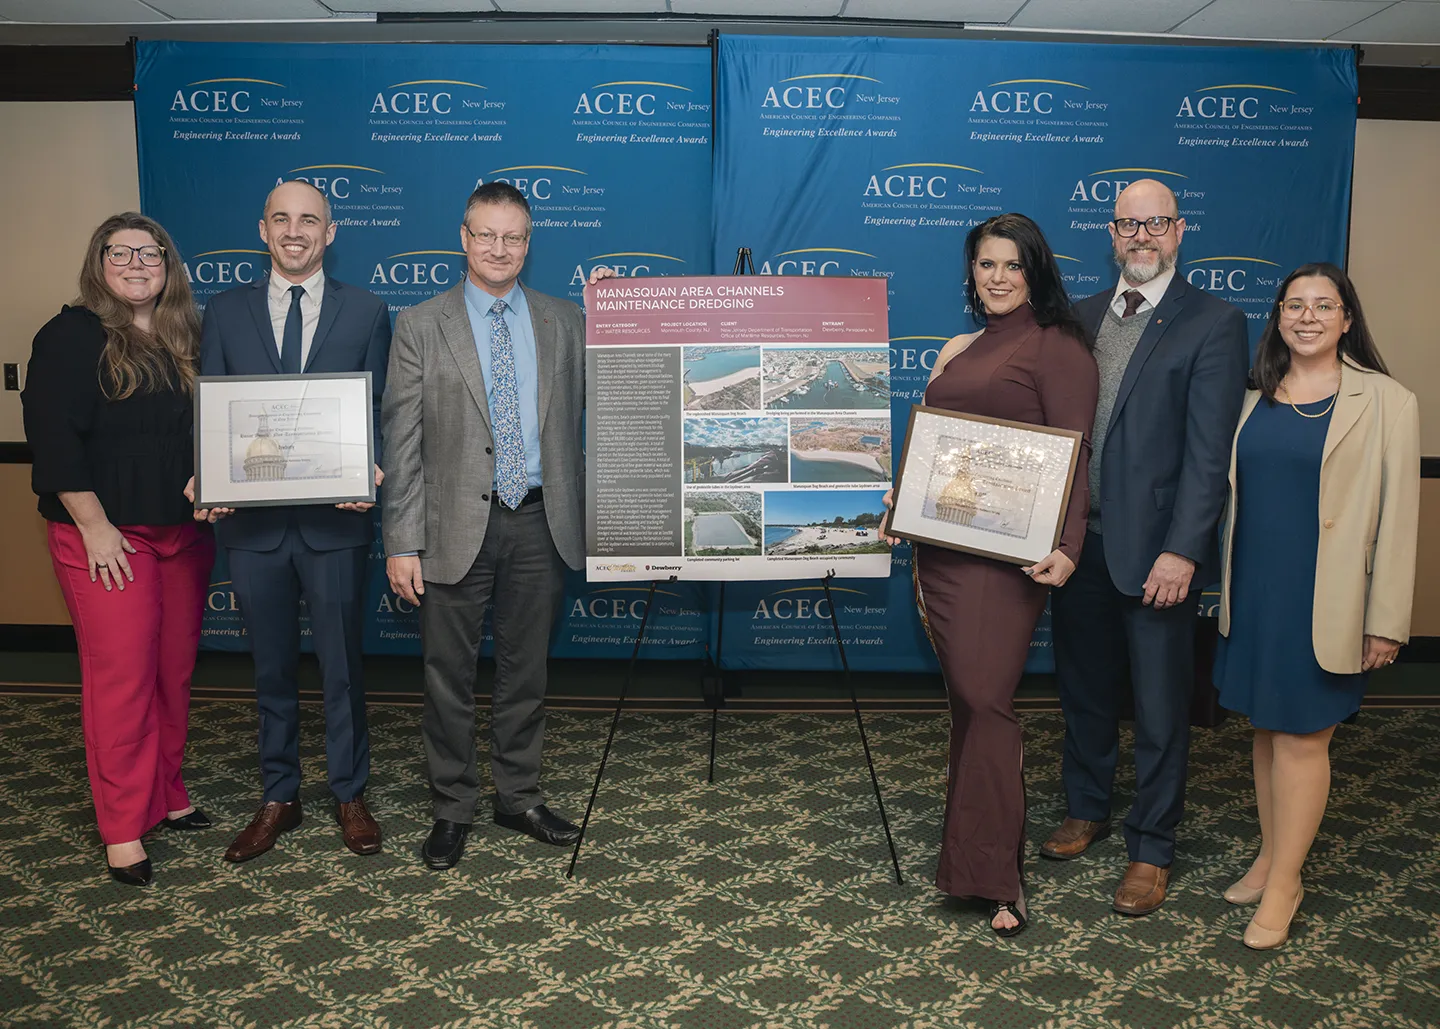 The project team for the Manasquan Area Channels Maintenance Dredging project at the ACEC NJ Engineering Excellence awards dinner event.